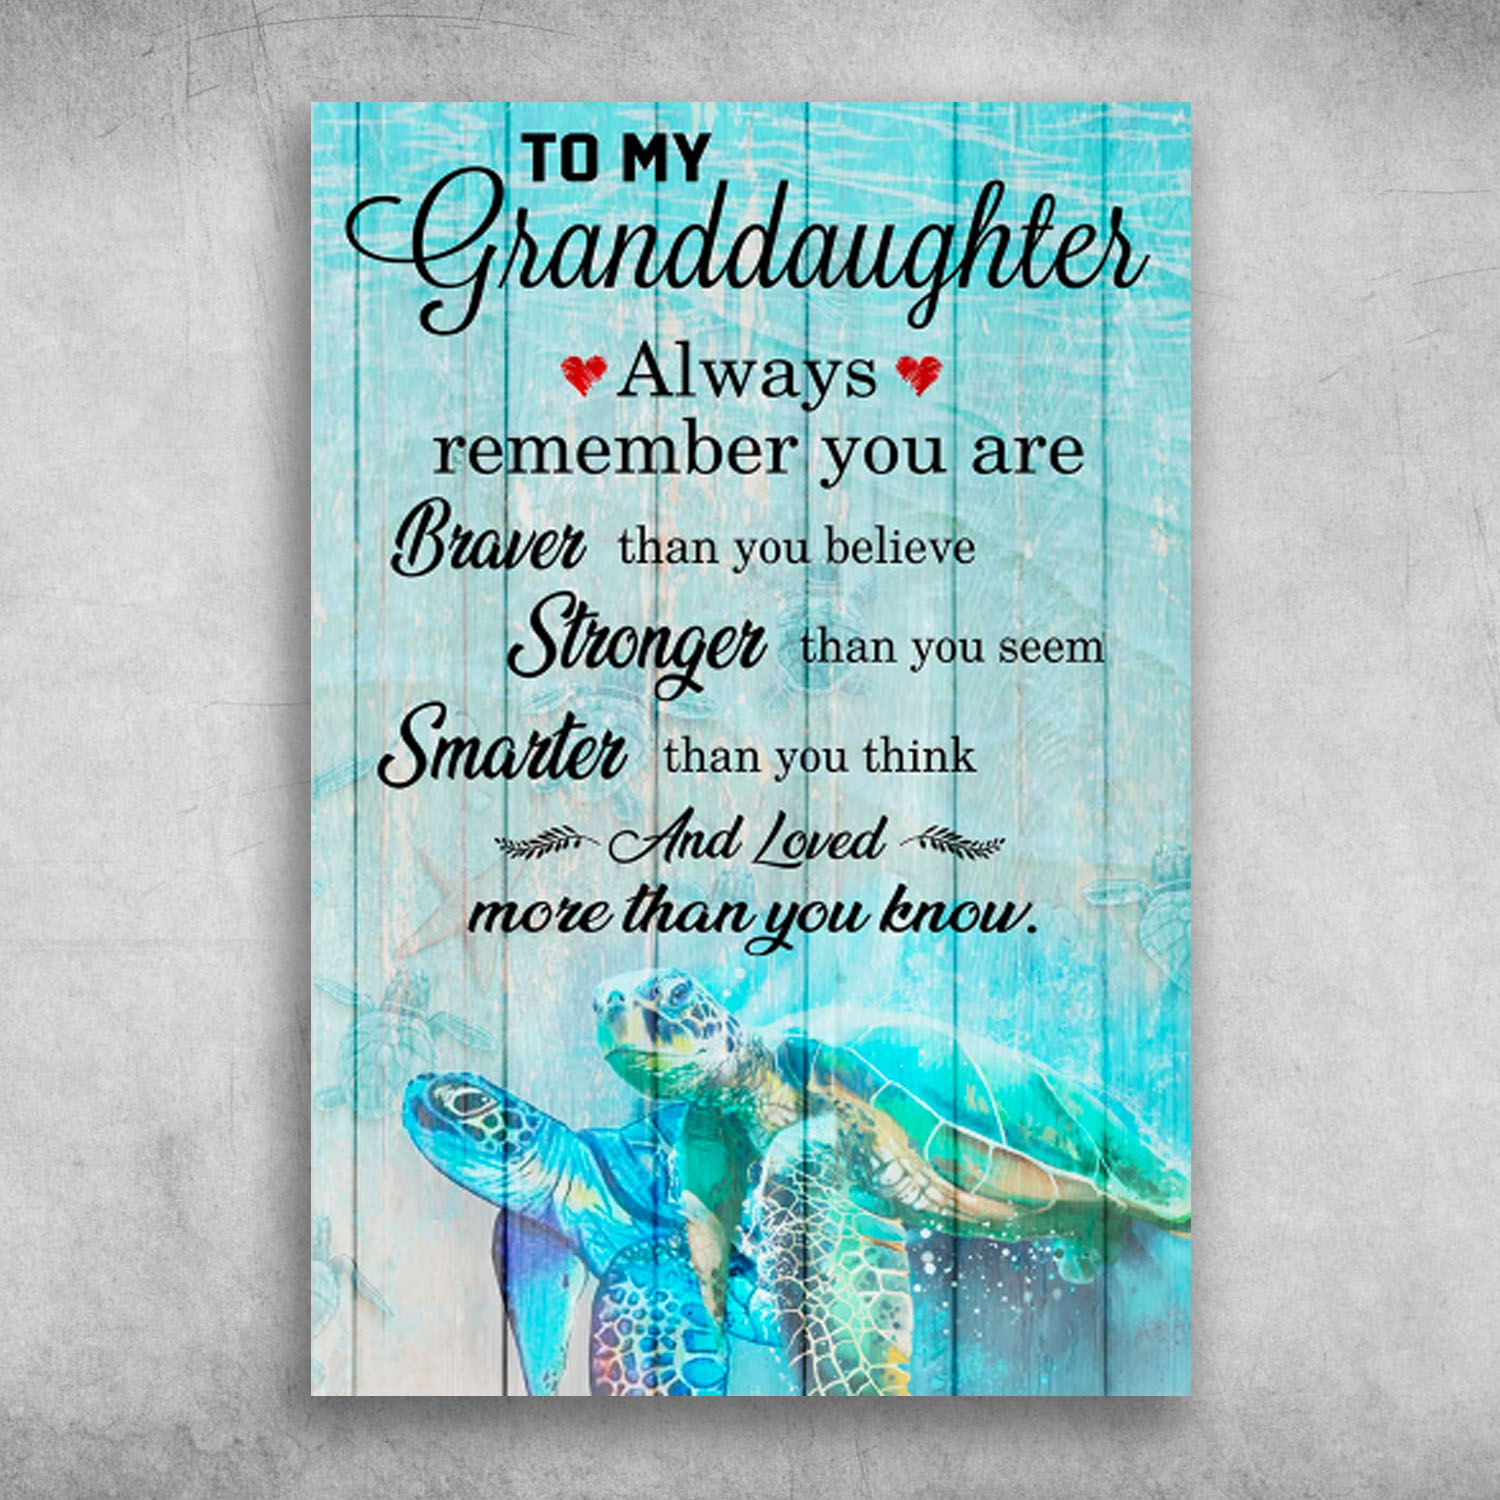 To My Granddaughter And Loved More Than You Know